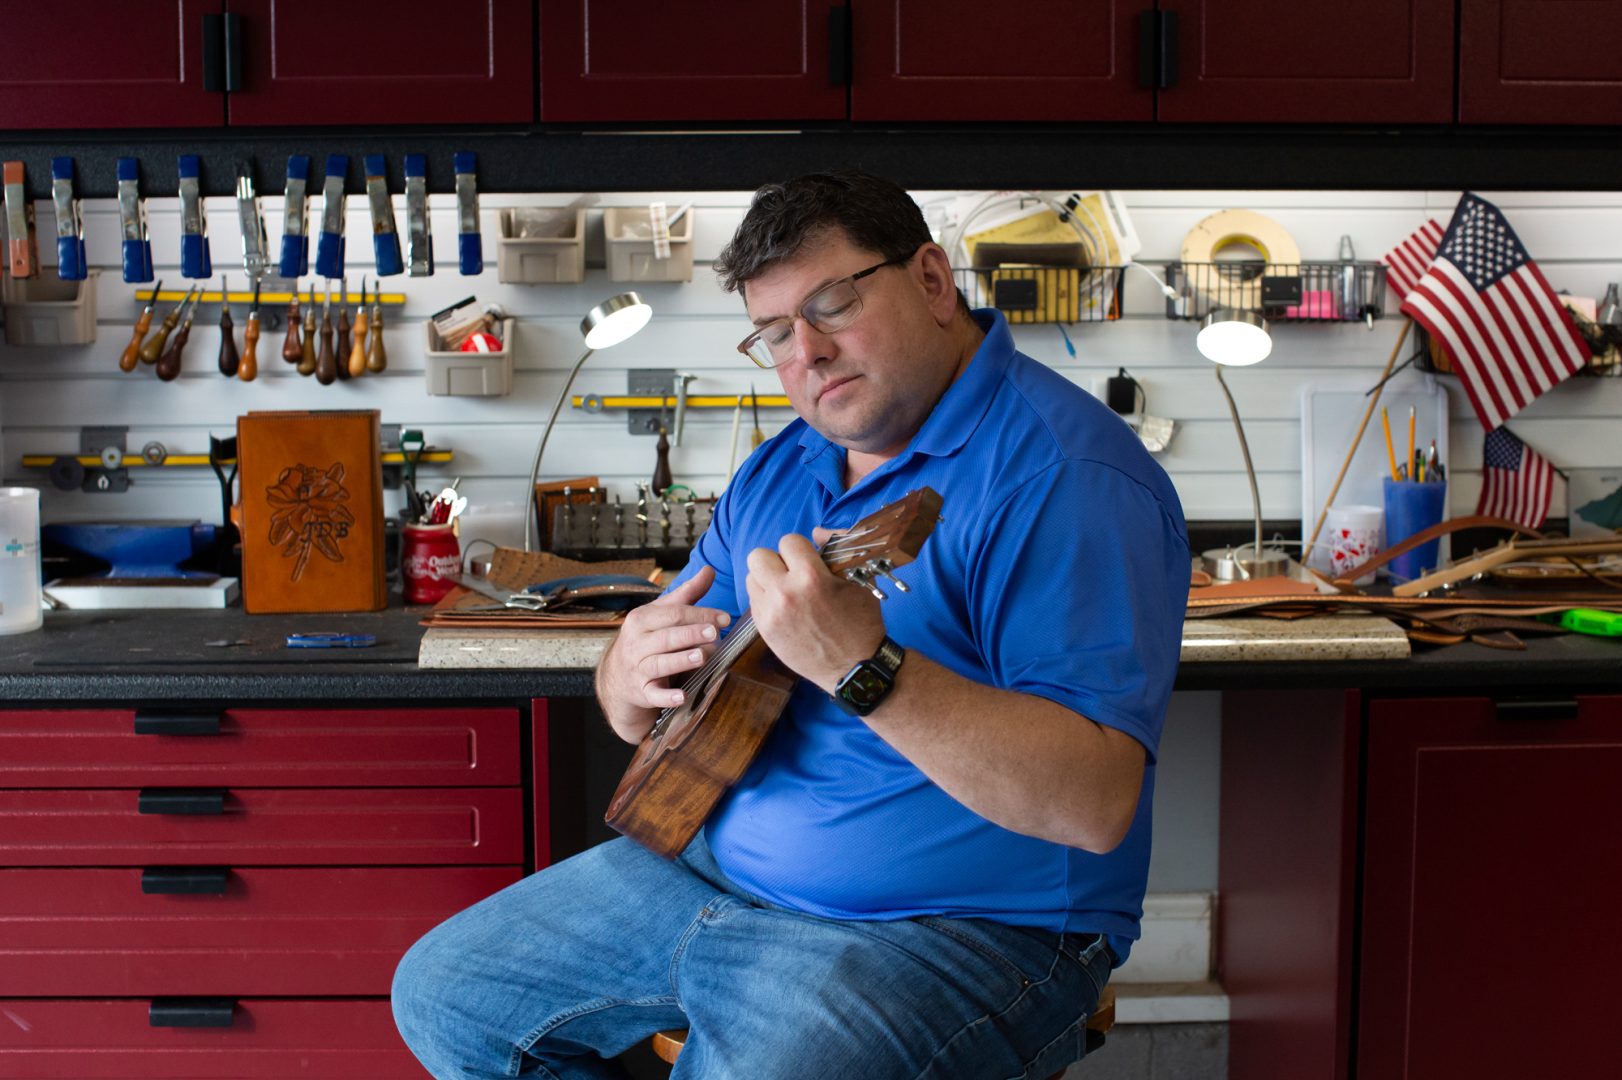 Michael Schneider, a retired Marine Corps Master Sergeant, plays a ukulele in his leatherworking studio at his home in Swansboro, North Carolina on February 12, 2022. He uses art and music therapy to help manage his epilepsy and PTSD following a traumatic brain injury. Schneider explains that by playing music, he can literally stop himself from having a seizure by affecting how his brain is functioning.